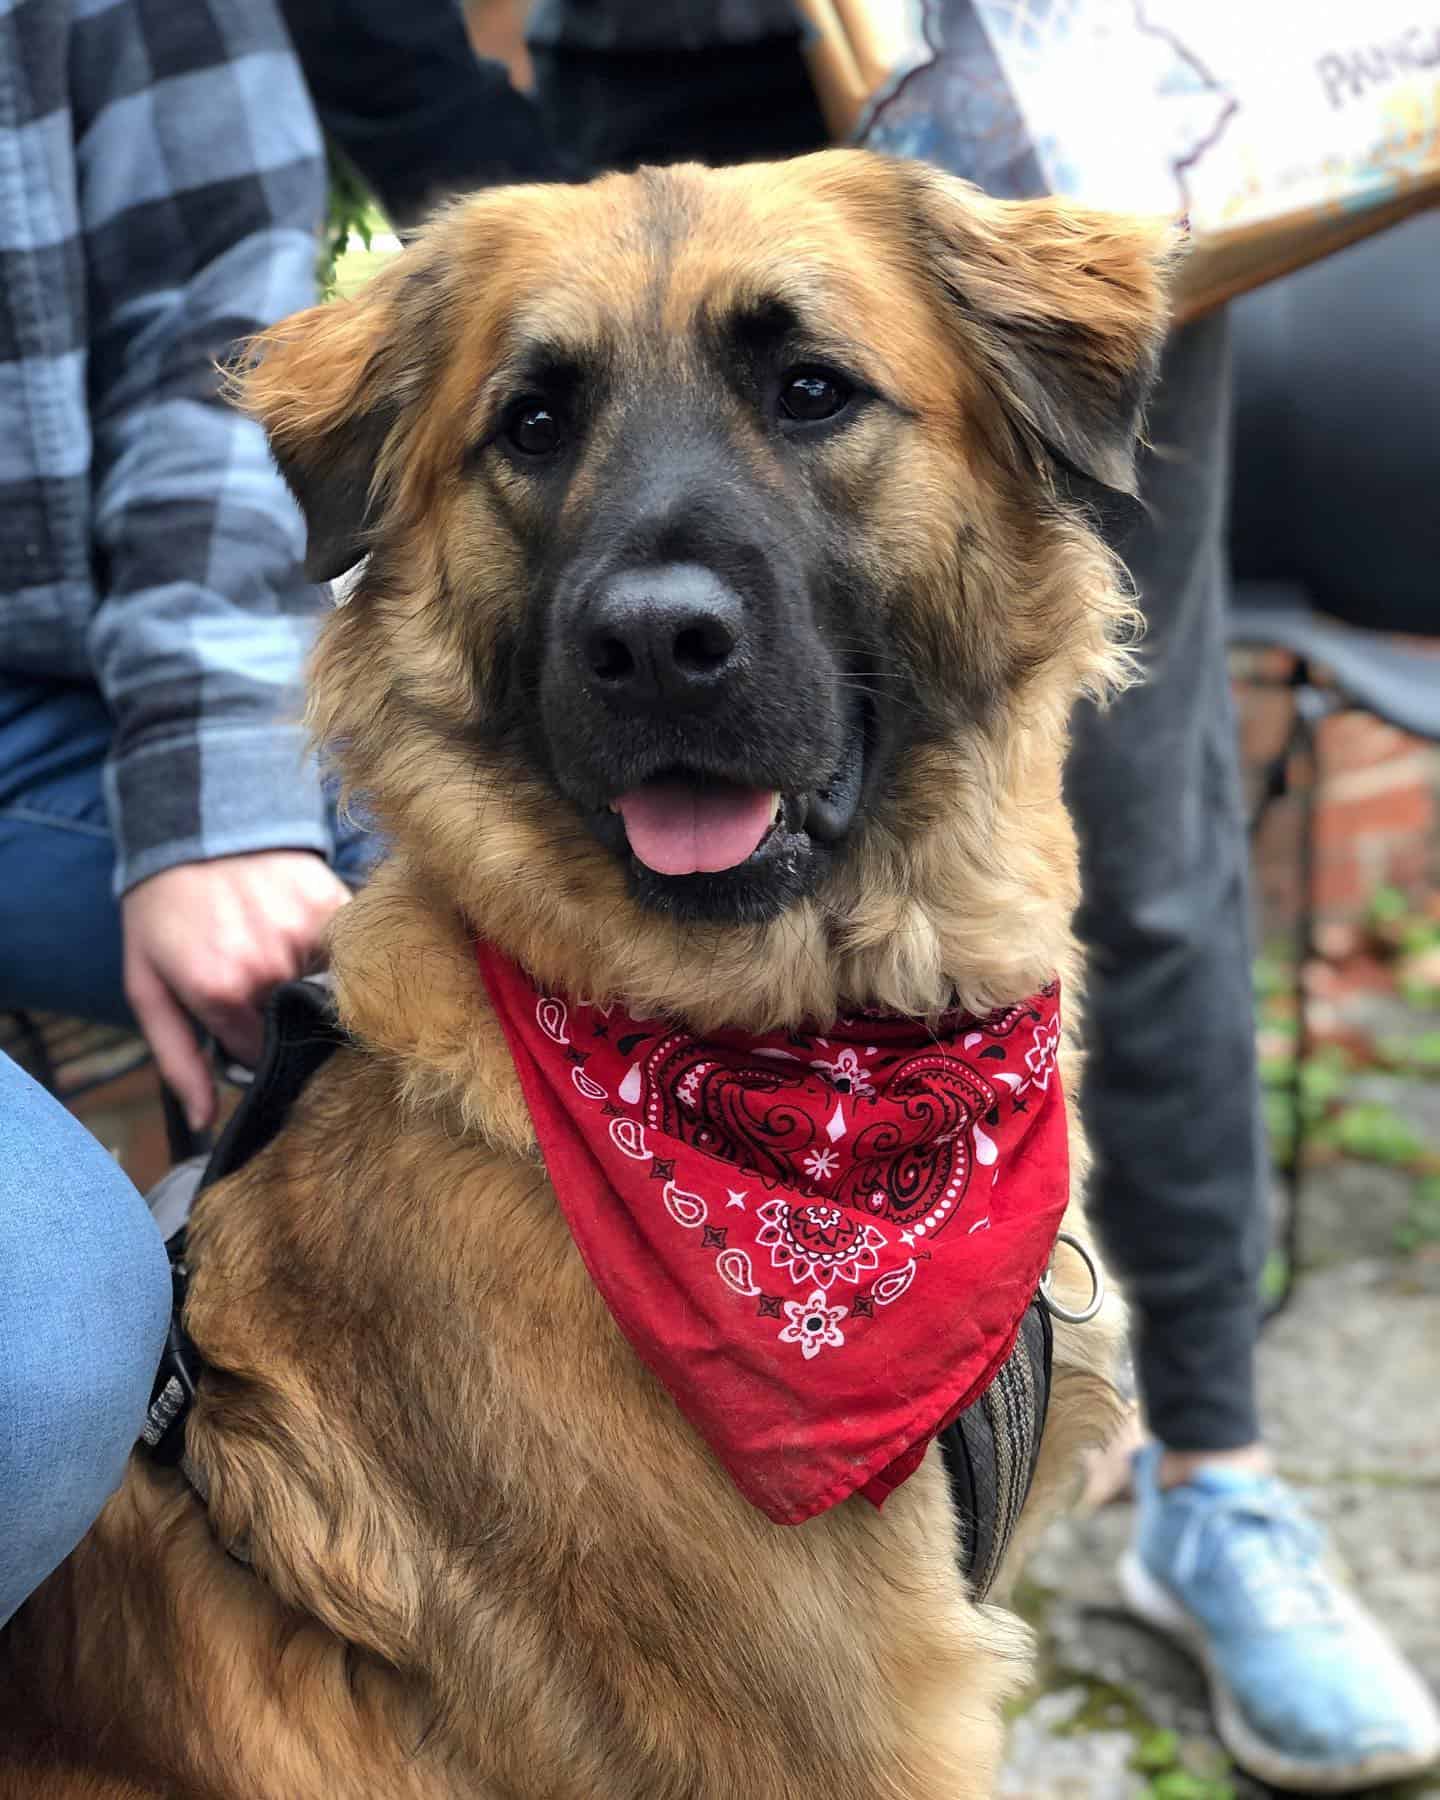 Golden Saint dog with red scarf